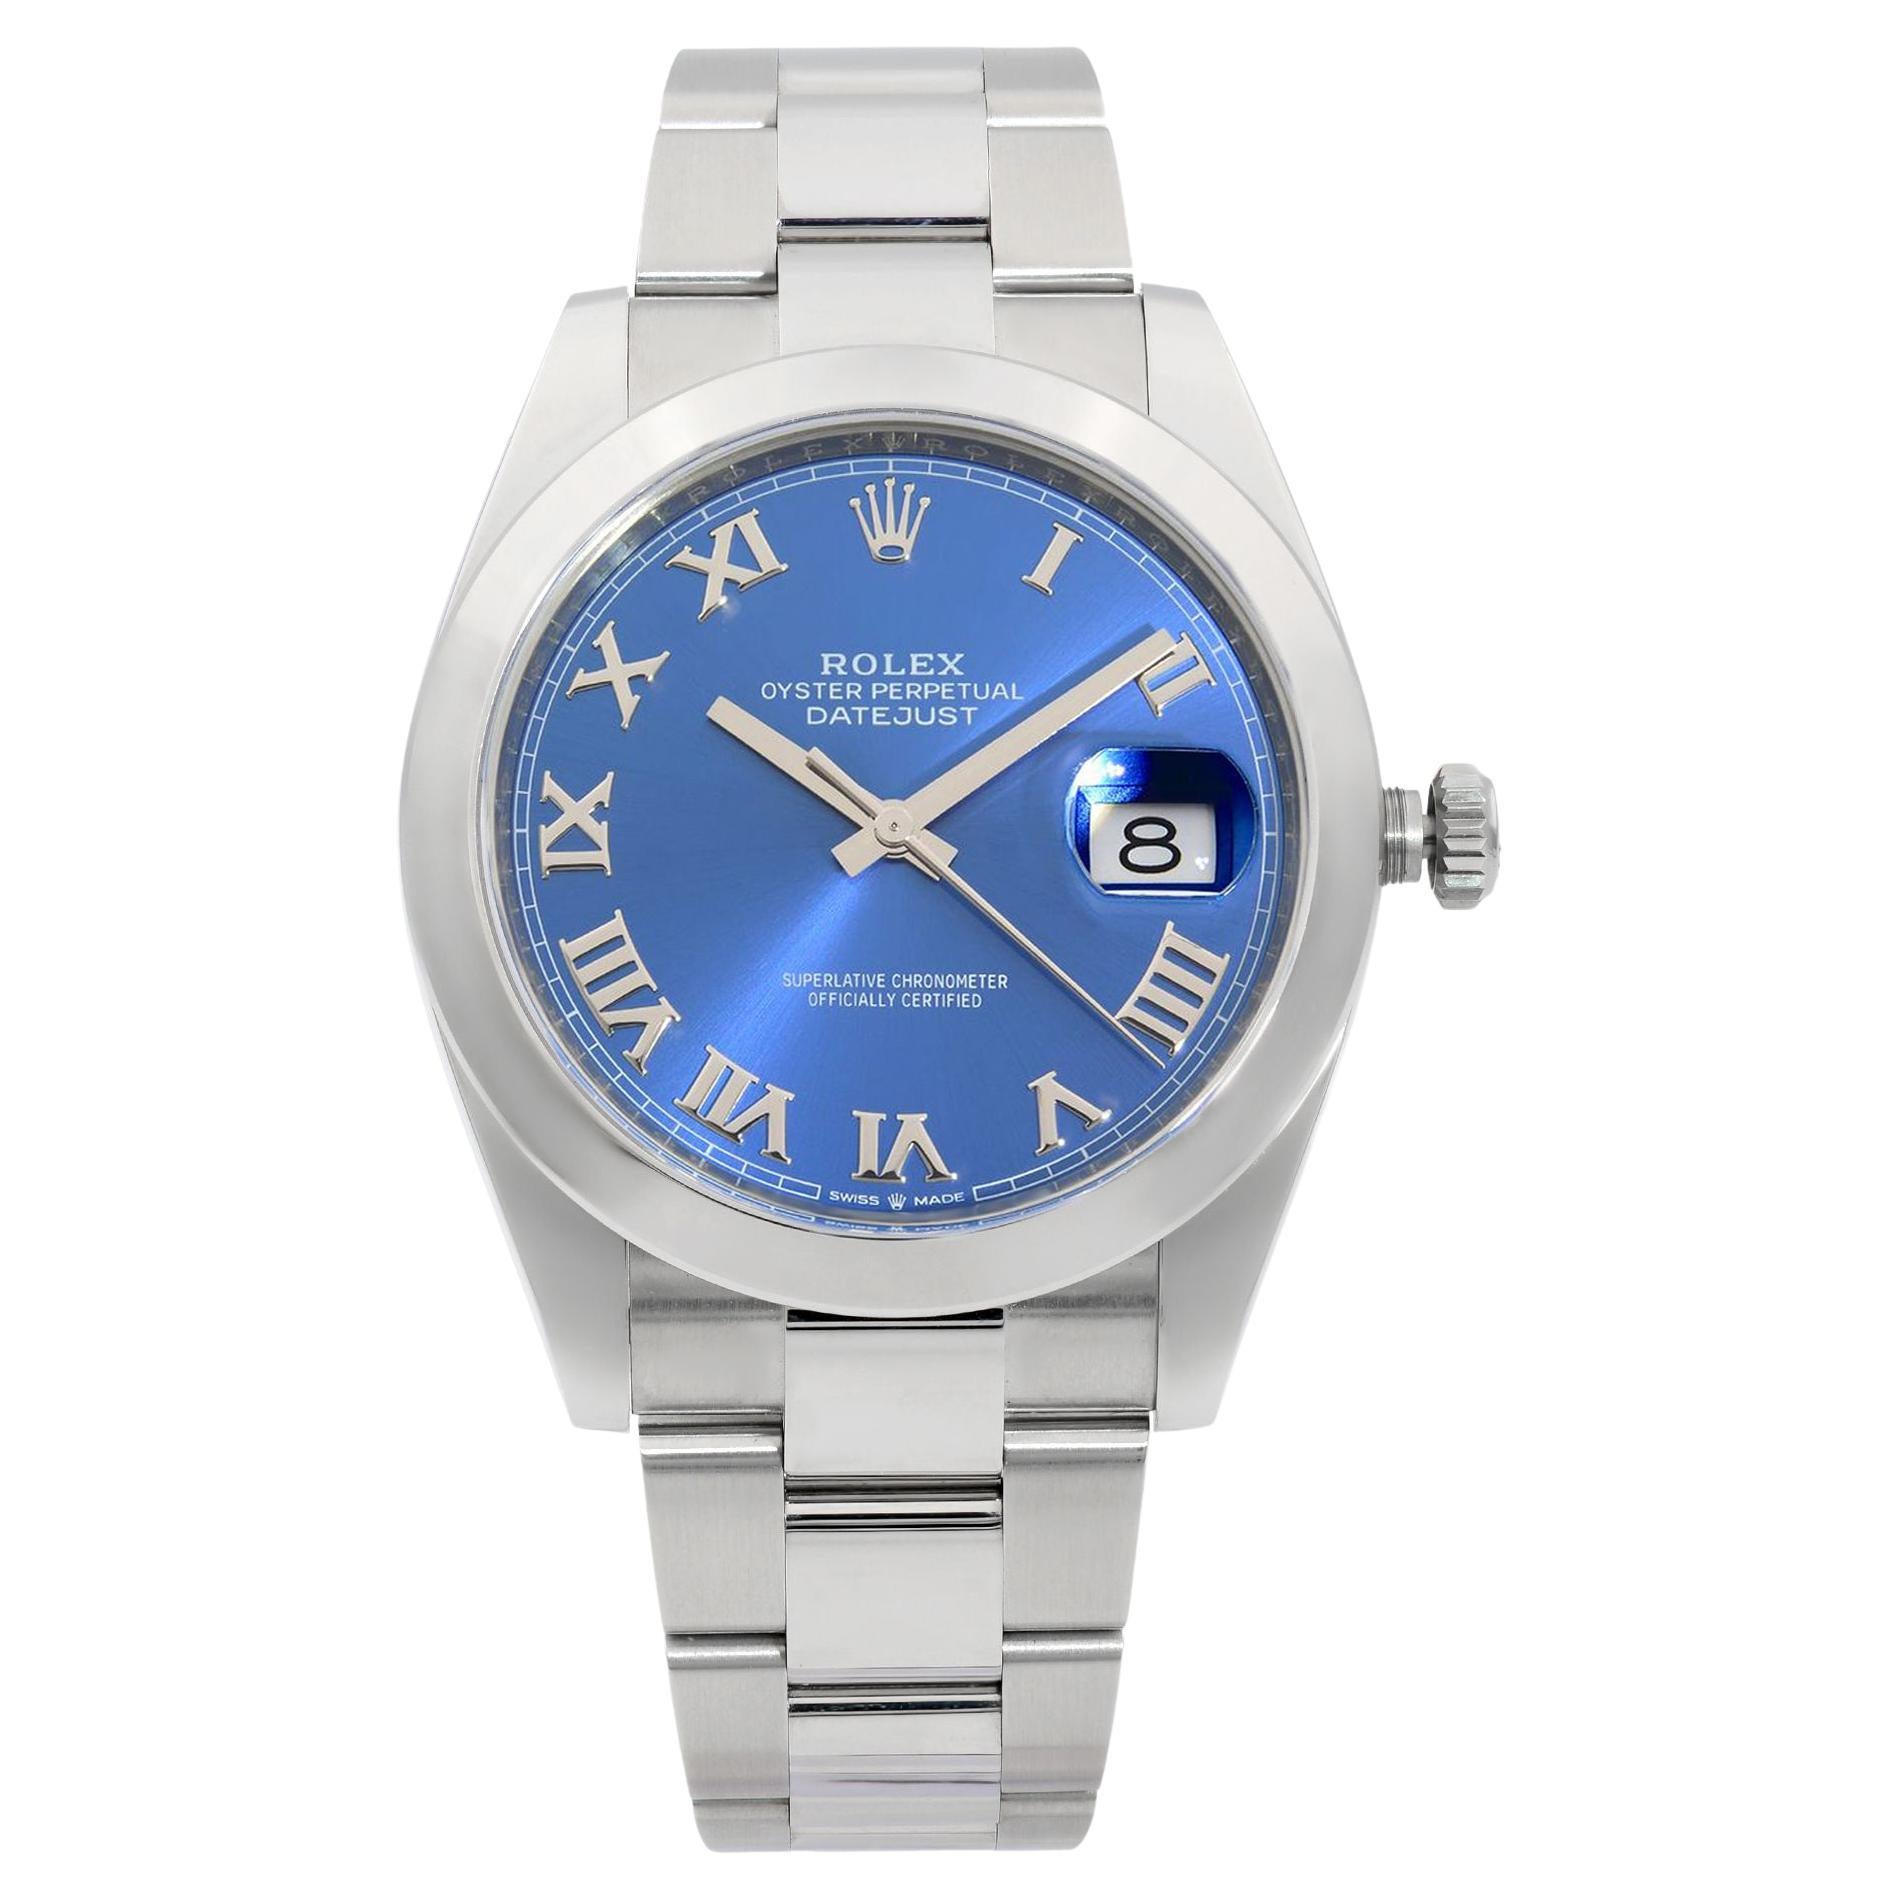 NEW Rolex Datejust 41mm Steel Blue Roman Dial Automatic Watch 126300 For Sale